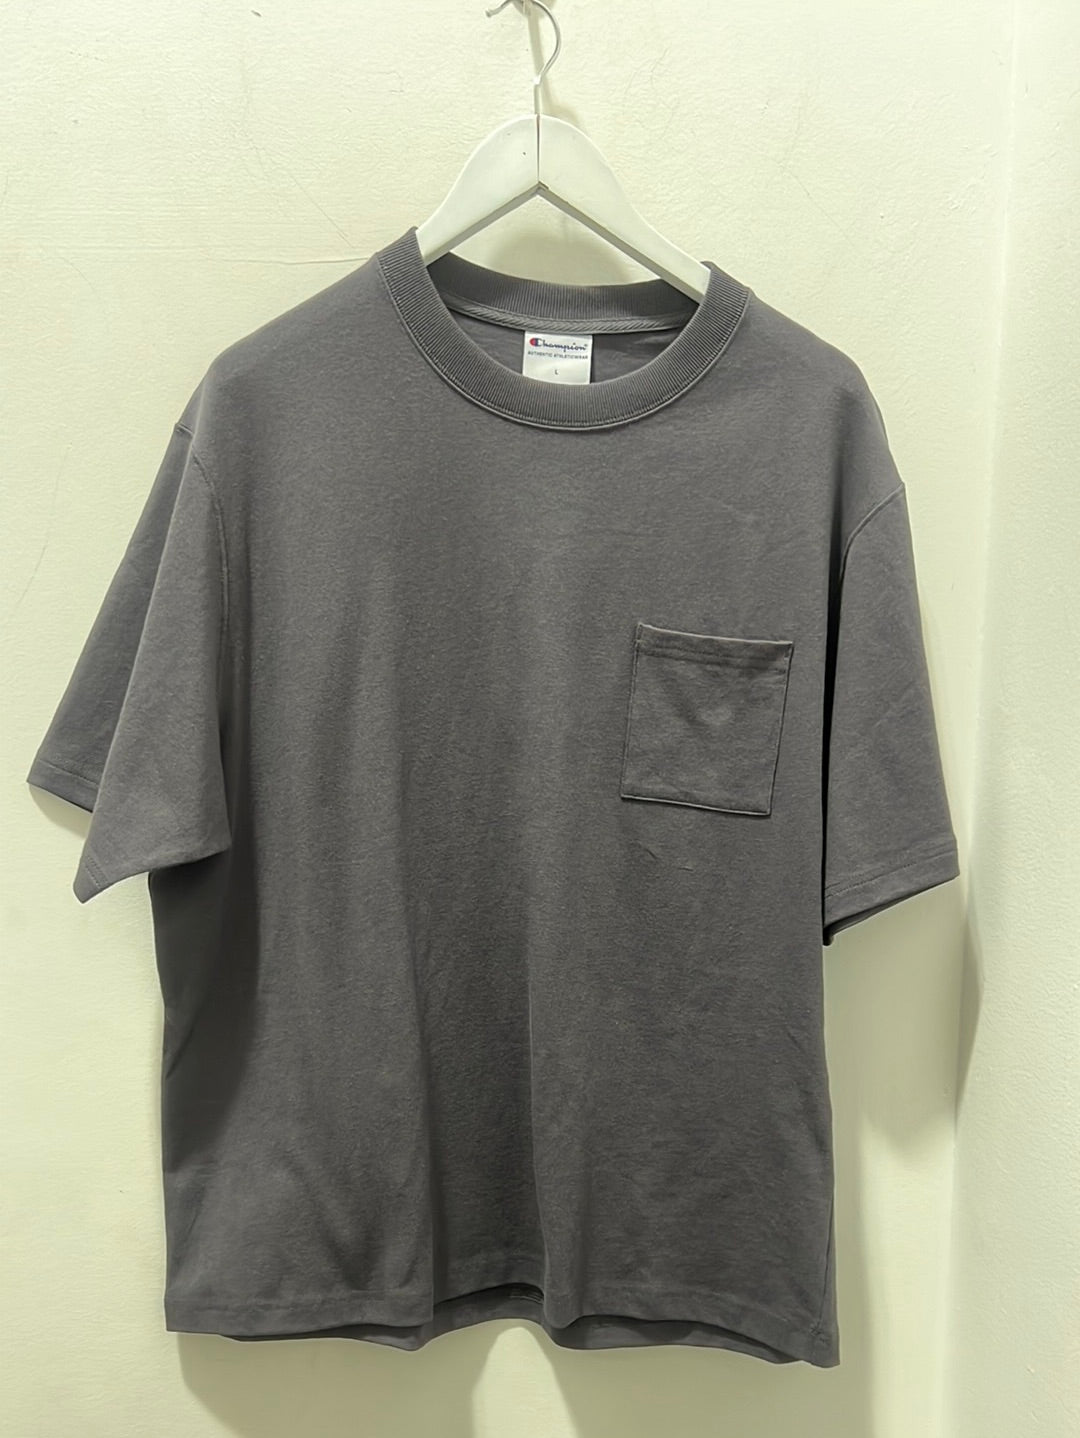 AUHBN JERSEY ELEMENT SS TEE SHADOW DUST